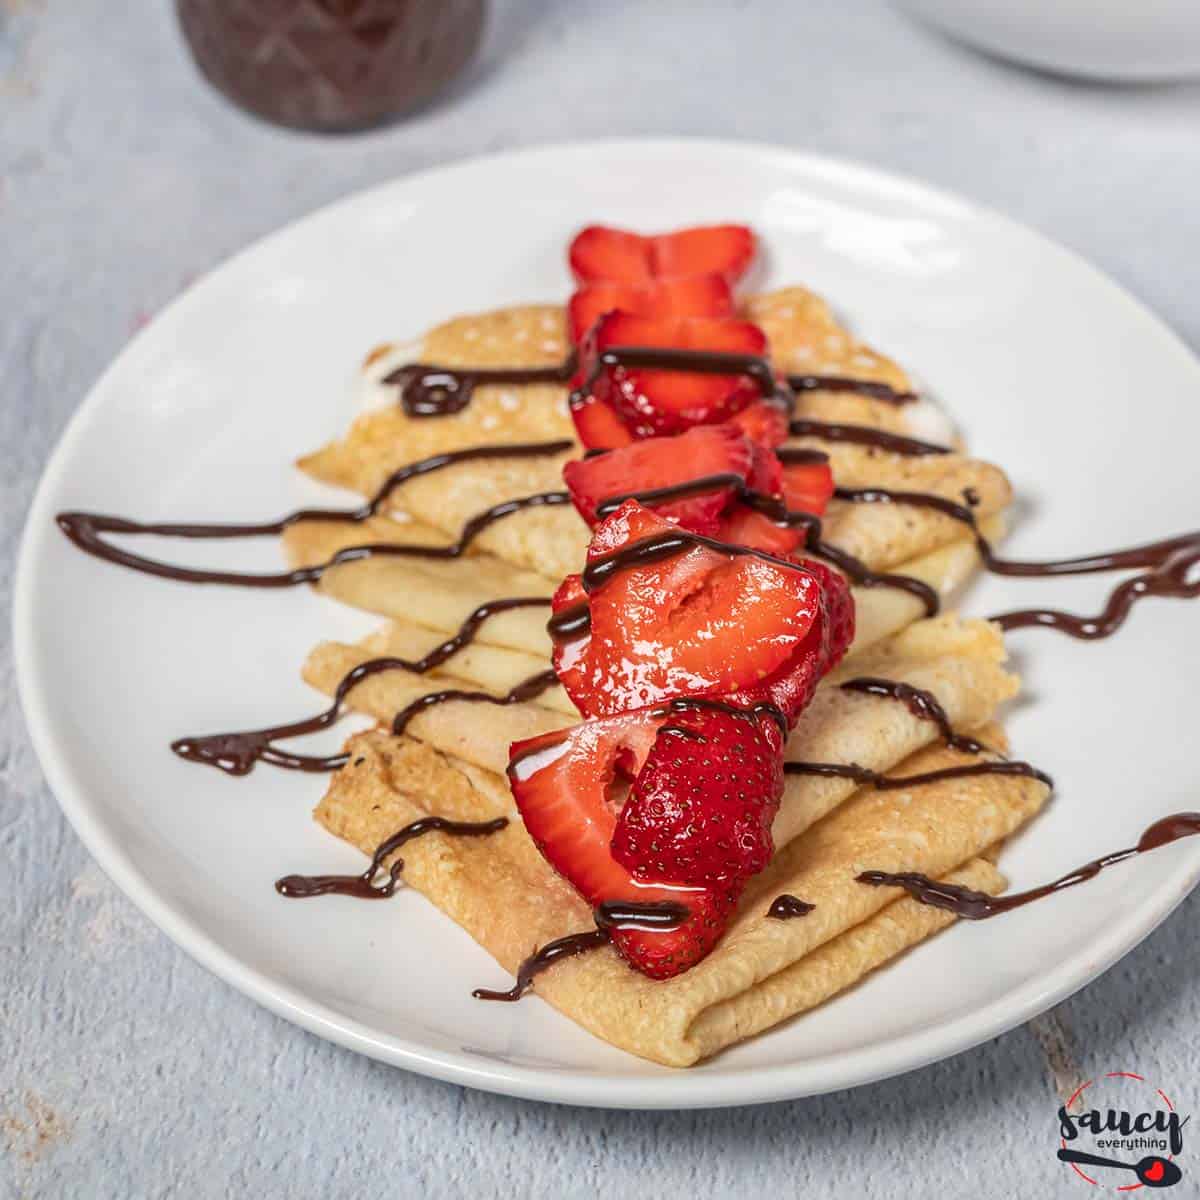 Chocolate sauce drizzled over crepes with strawberries on a plate